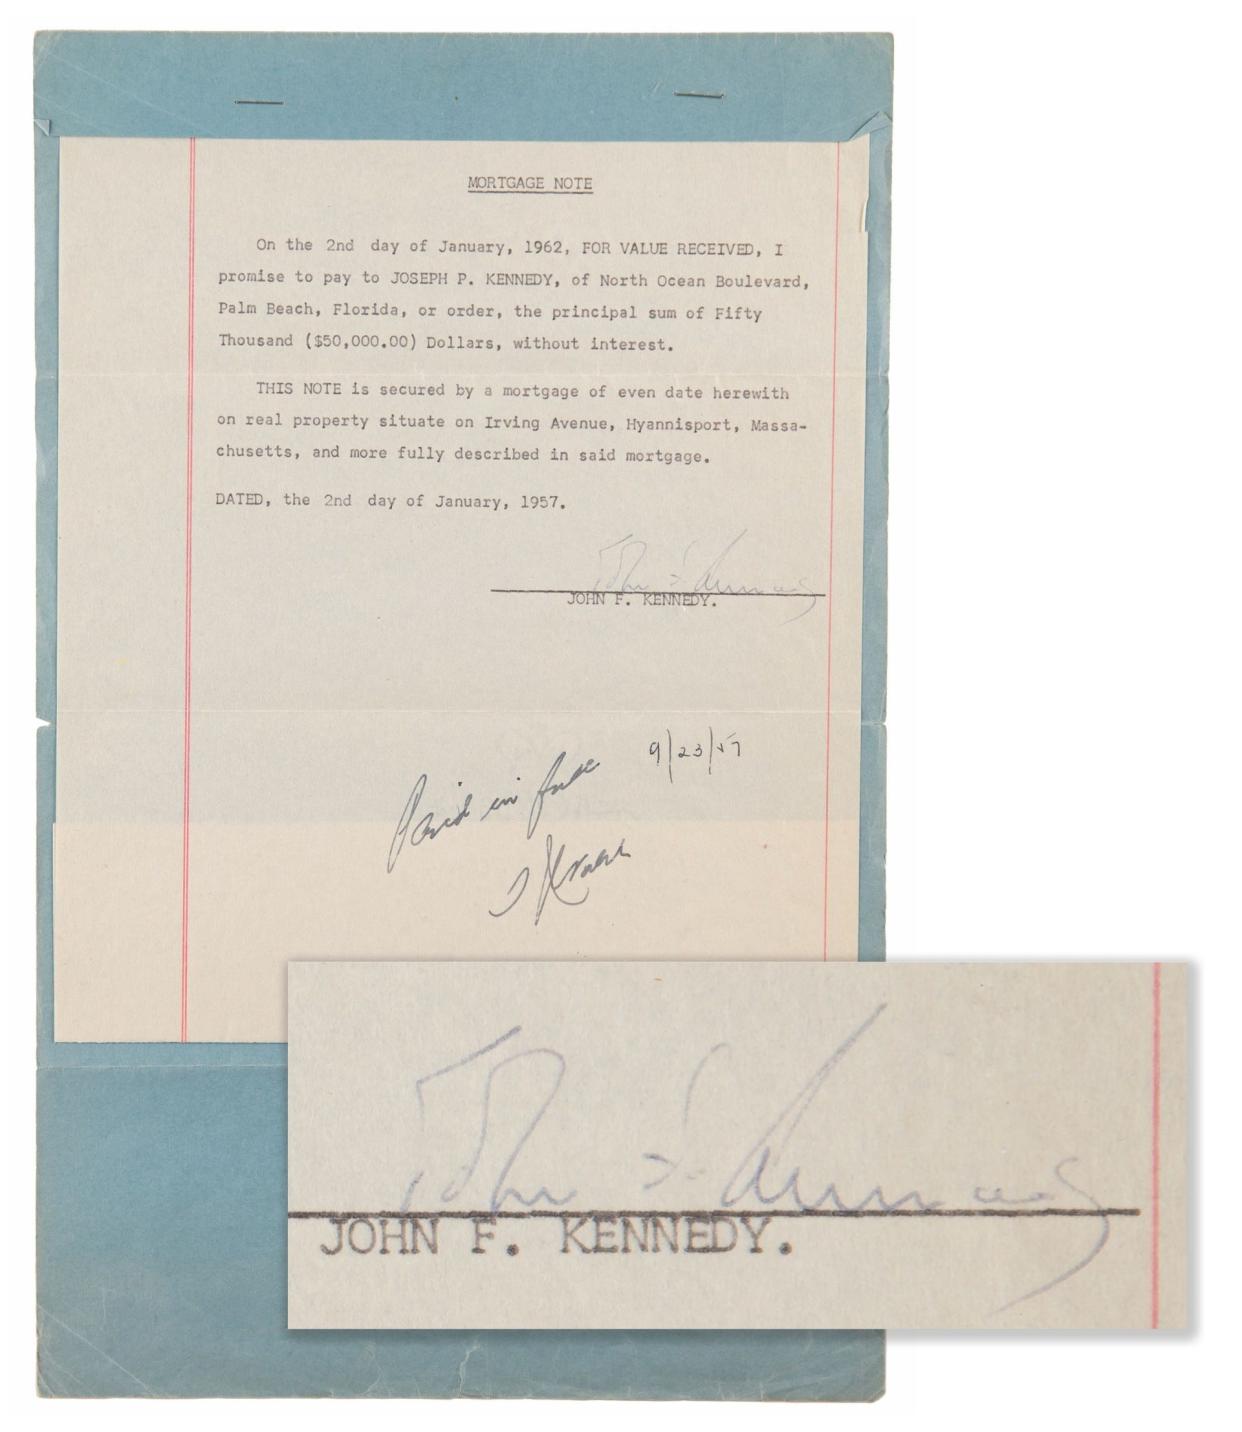 A rare piece of American memorabilia tied into the Hyannisport home of John F. Kennedy is now up for grabs by the highest bidder. The item is a mortgage note between JFK and his father, Joseph Kennedy Sr., dating to 1957, the year after JFK just missed winning his party's nomination for vice president under Adlai Stevenson. It was three years before JFK declared his own candidacy, and four years before he was inaugurated.